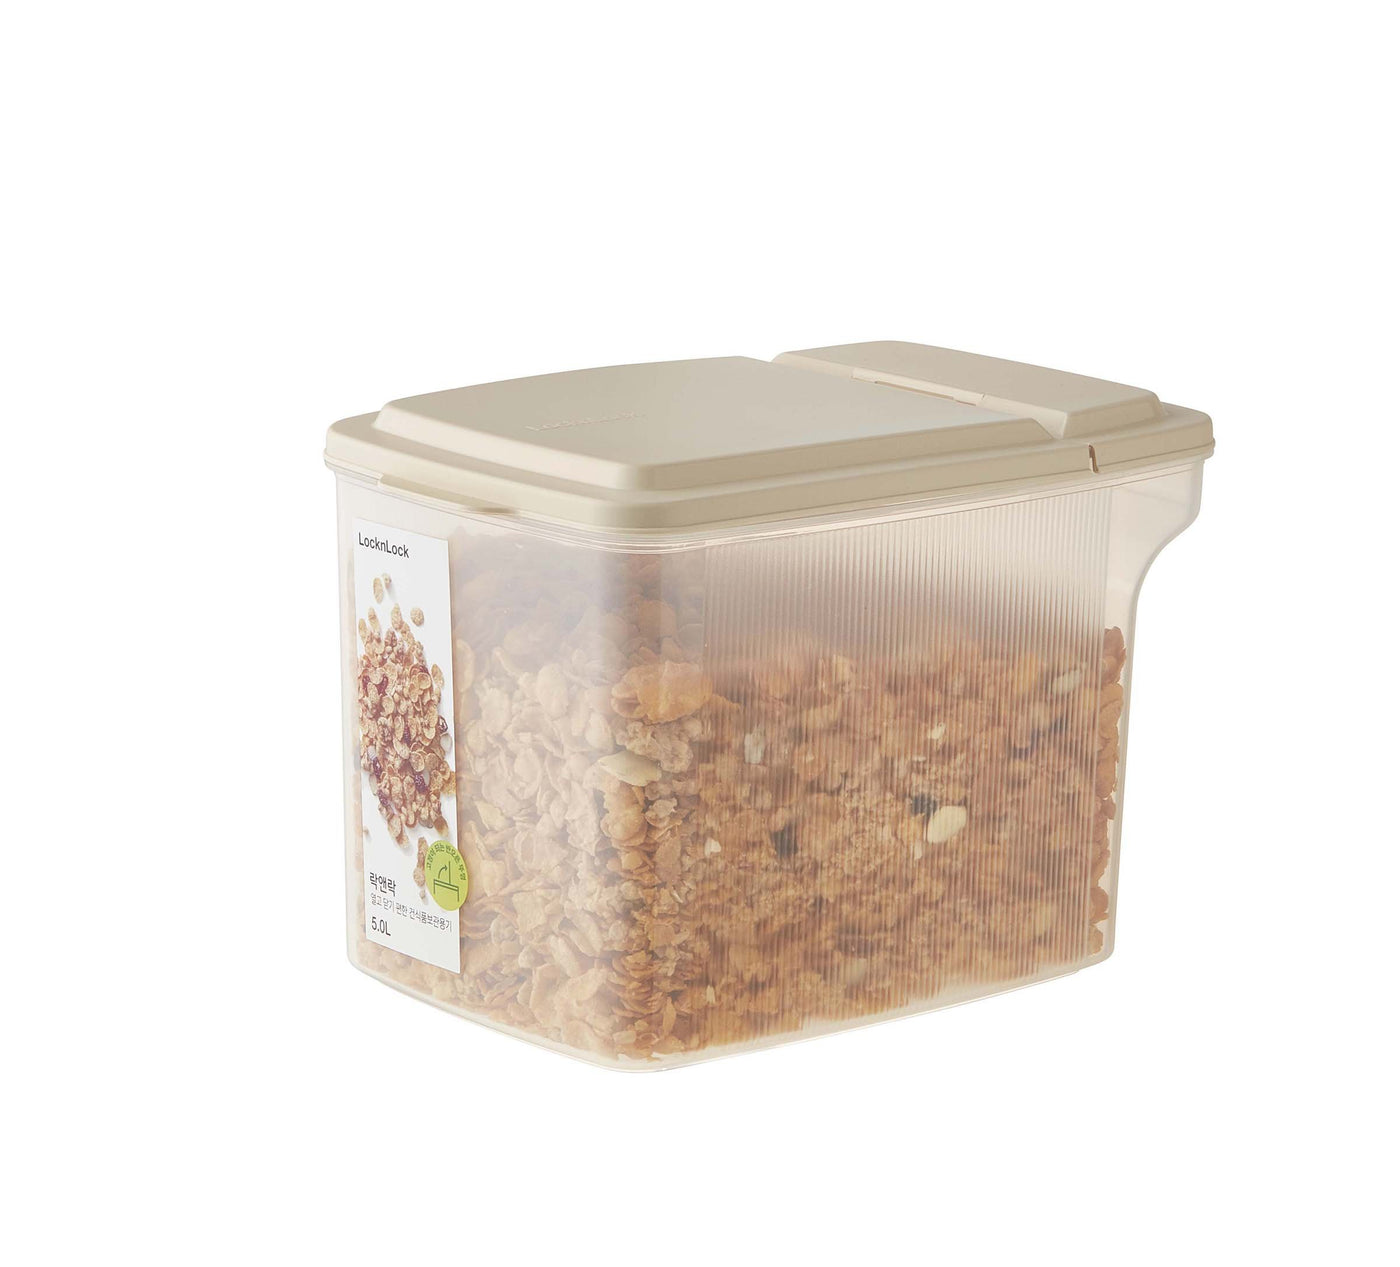 EASY PANTRY CONTAINER - 5LTR